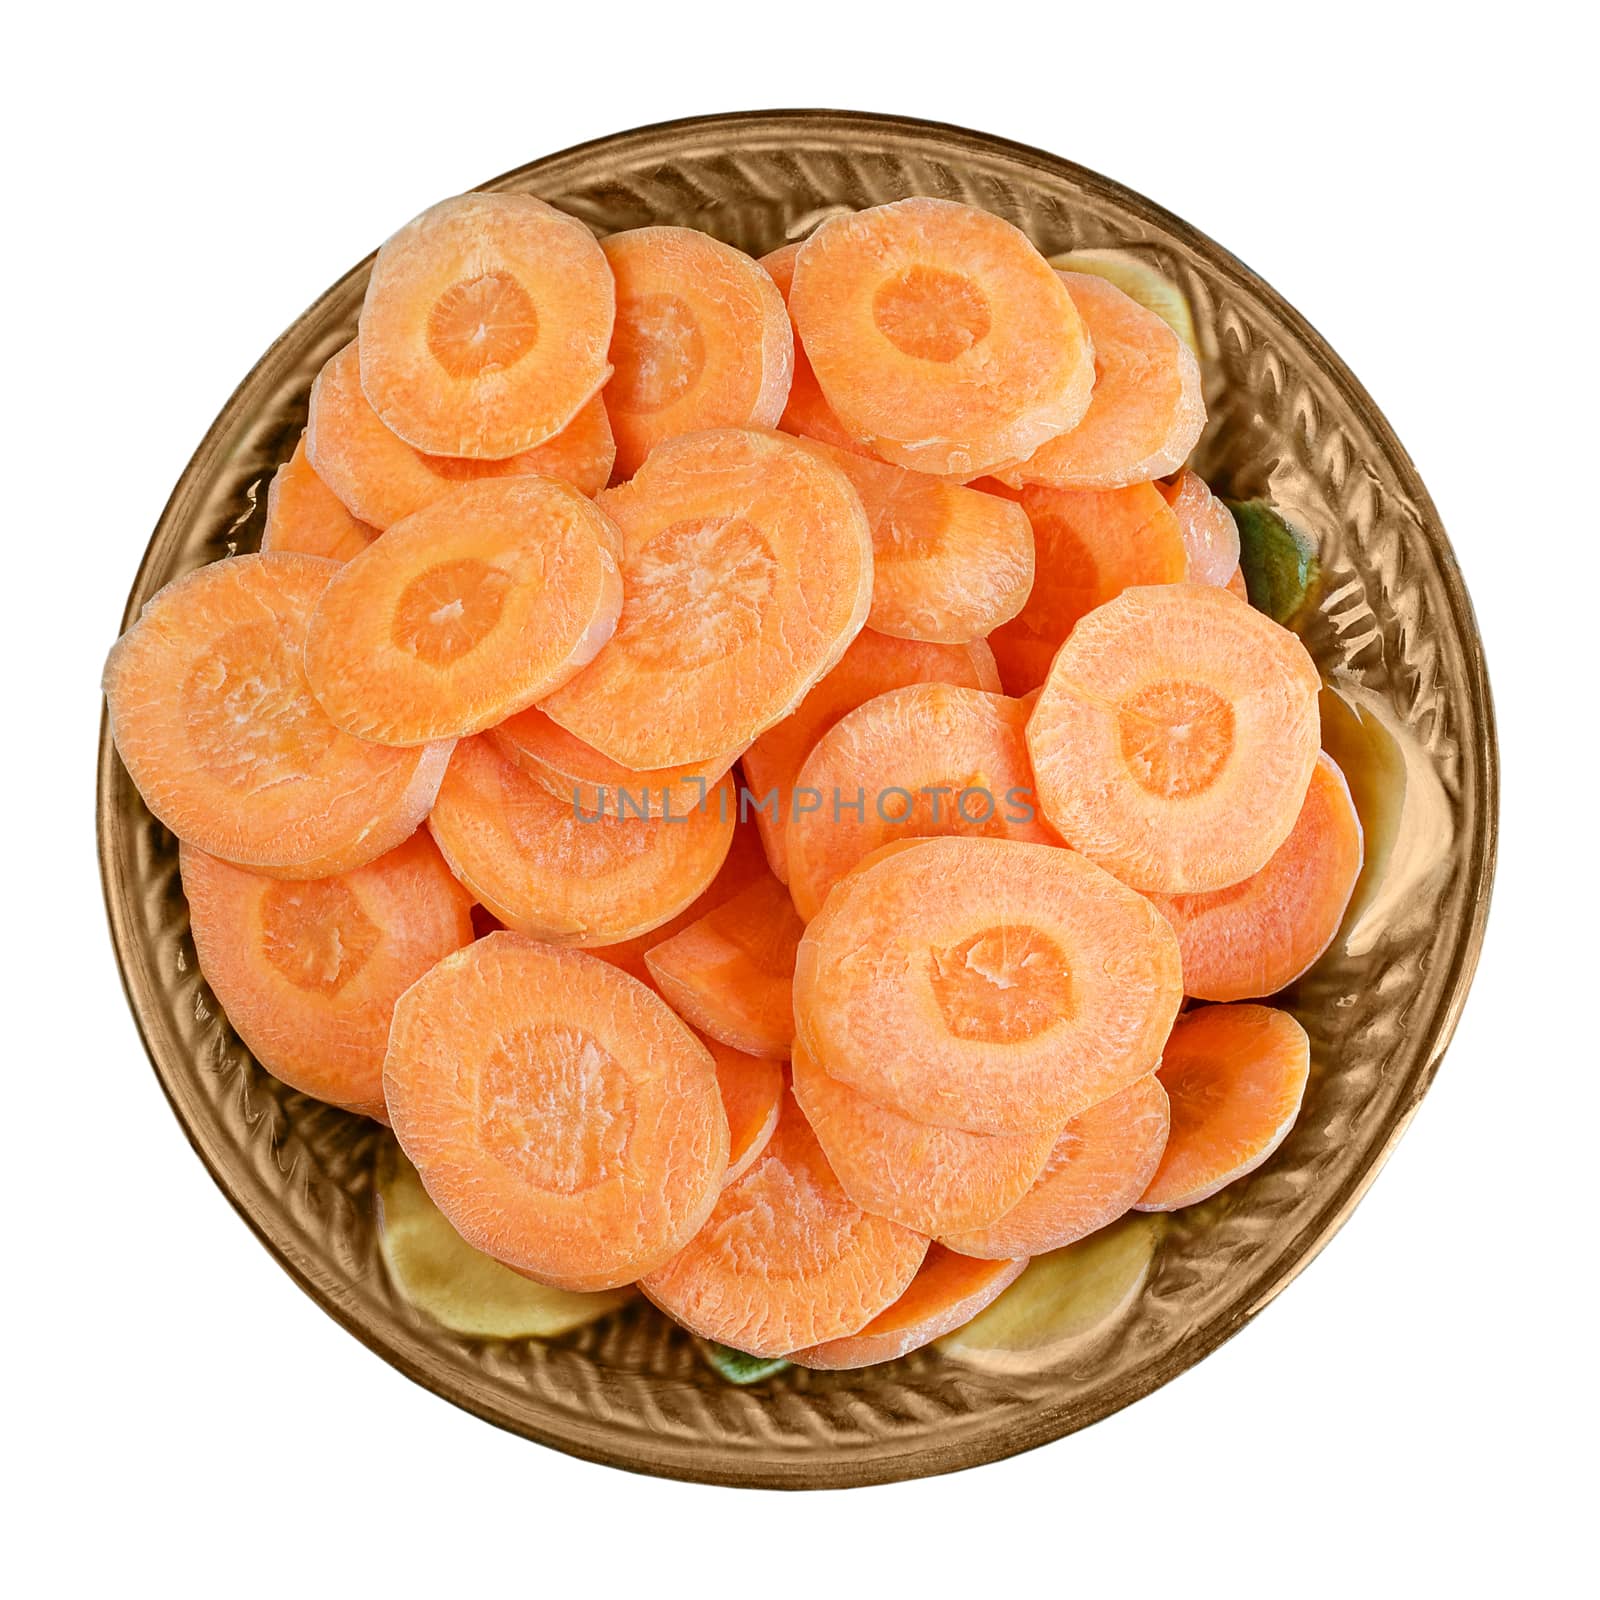 Sliced carrot slices in a bowl by Gaina